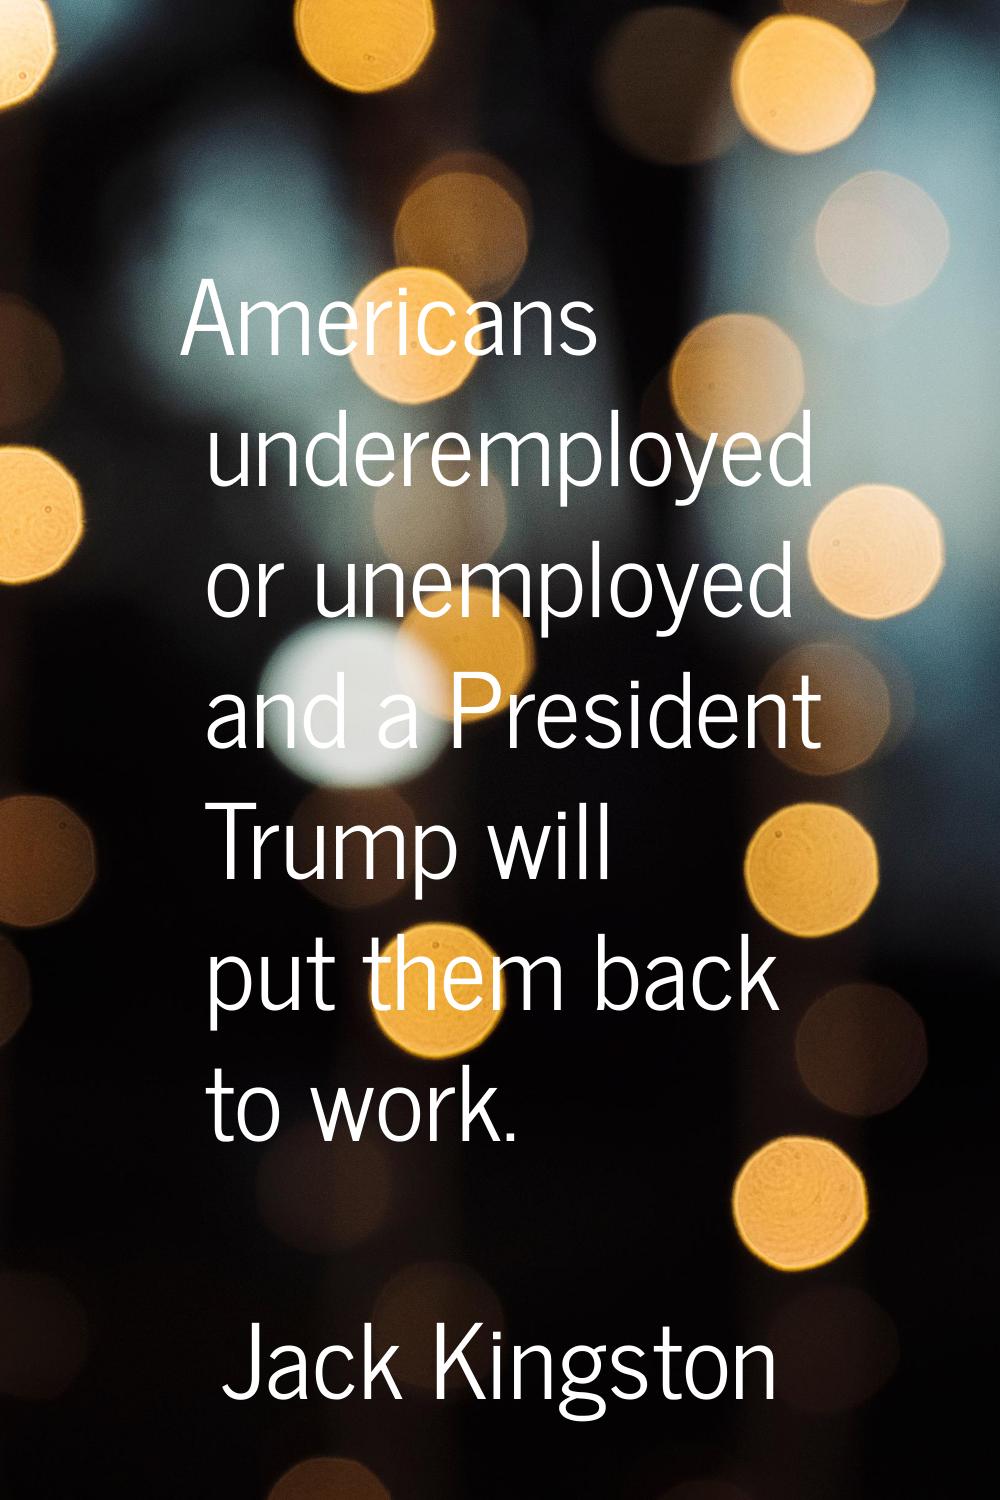 Americans underemployed or unemployed and a President Trump will put them back to work.